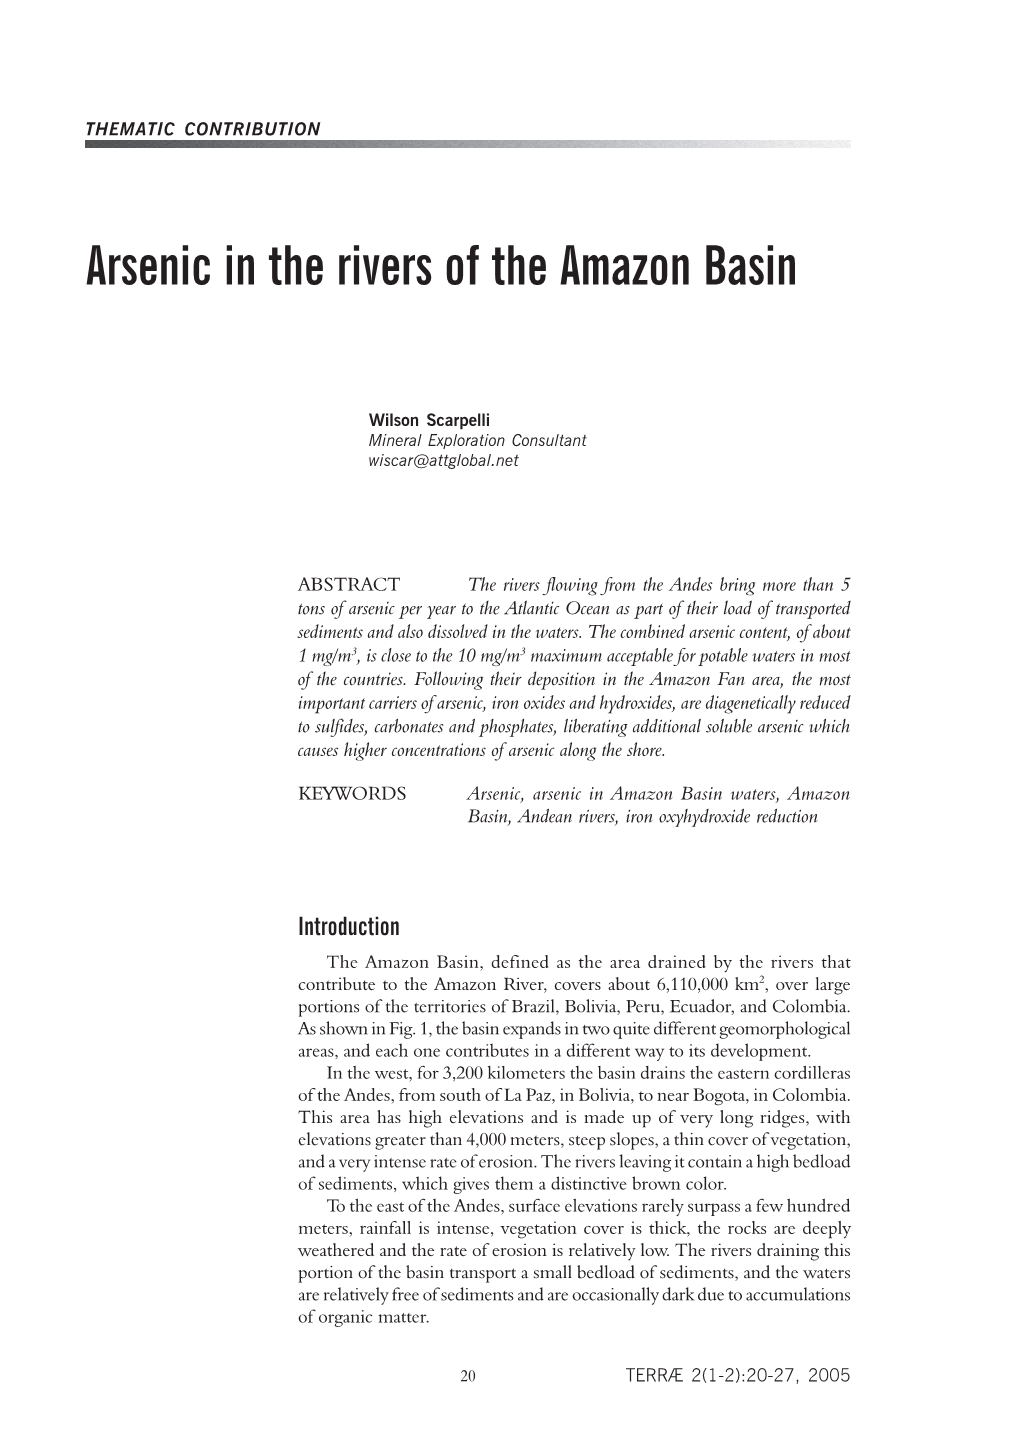 Arsenic in the Rivers of the Amazon Basin